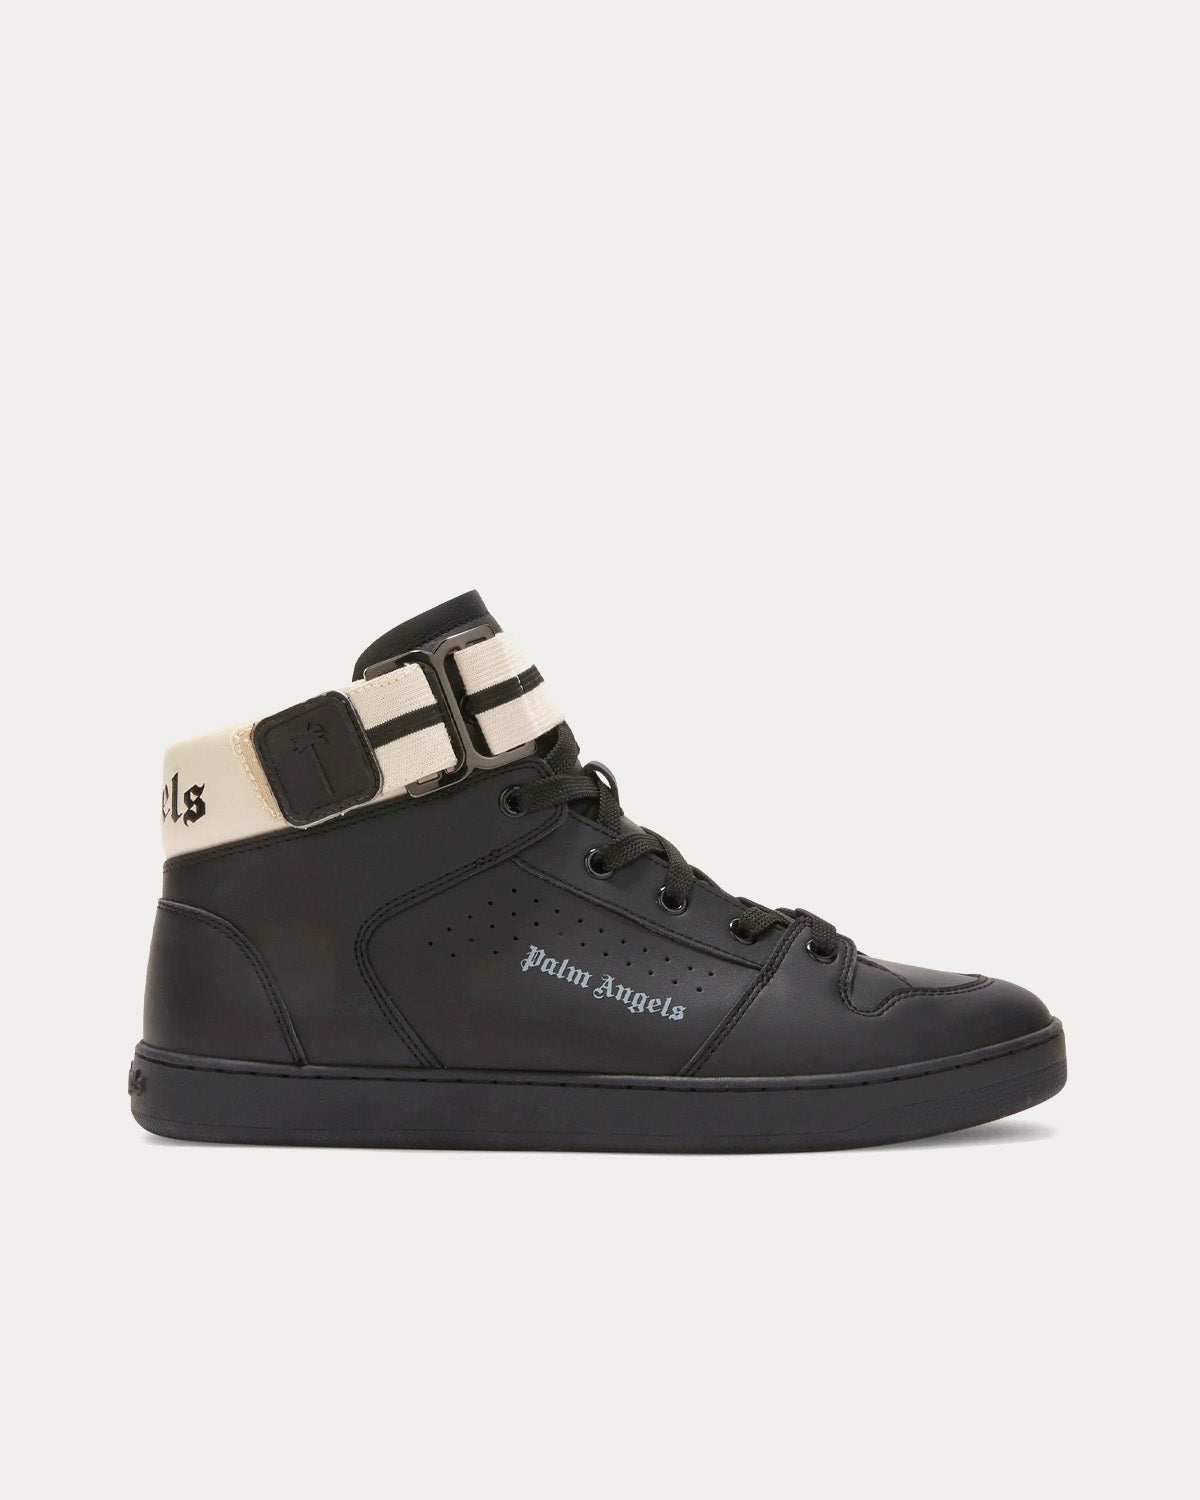 Palm Angels - Palm One Black High Top Sneakers